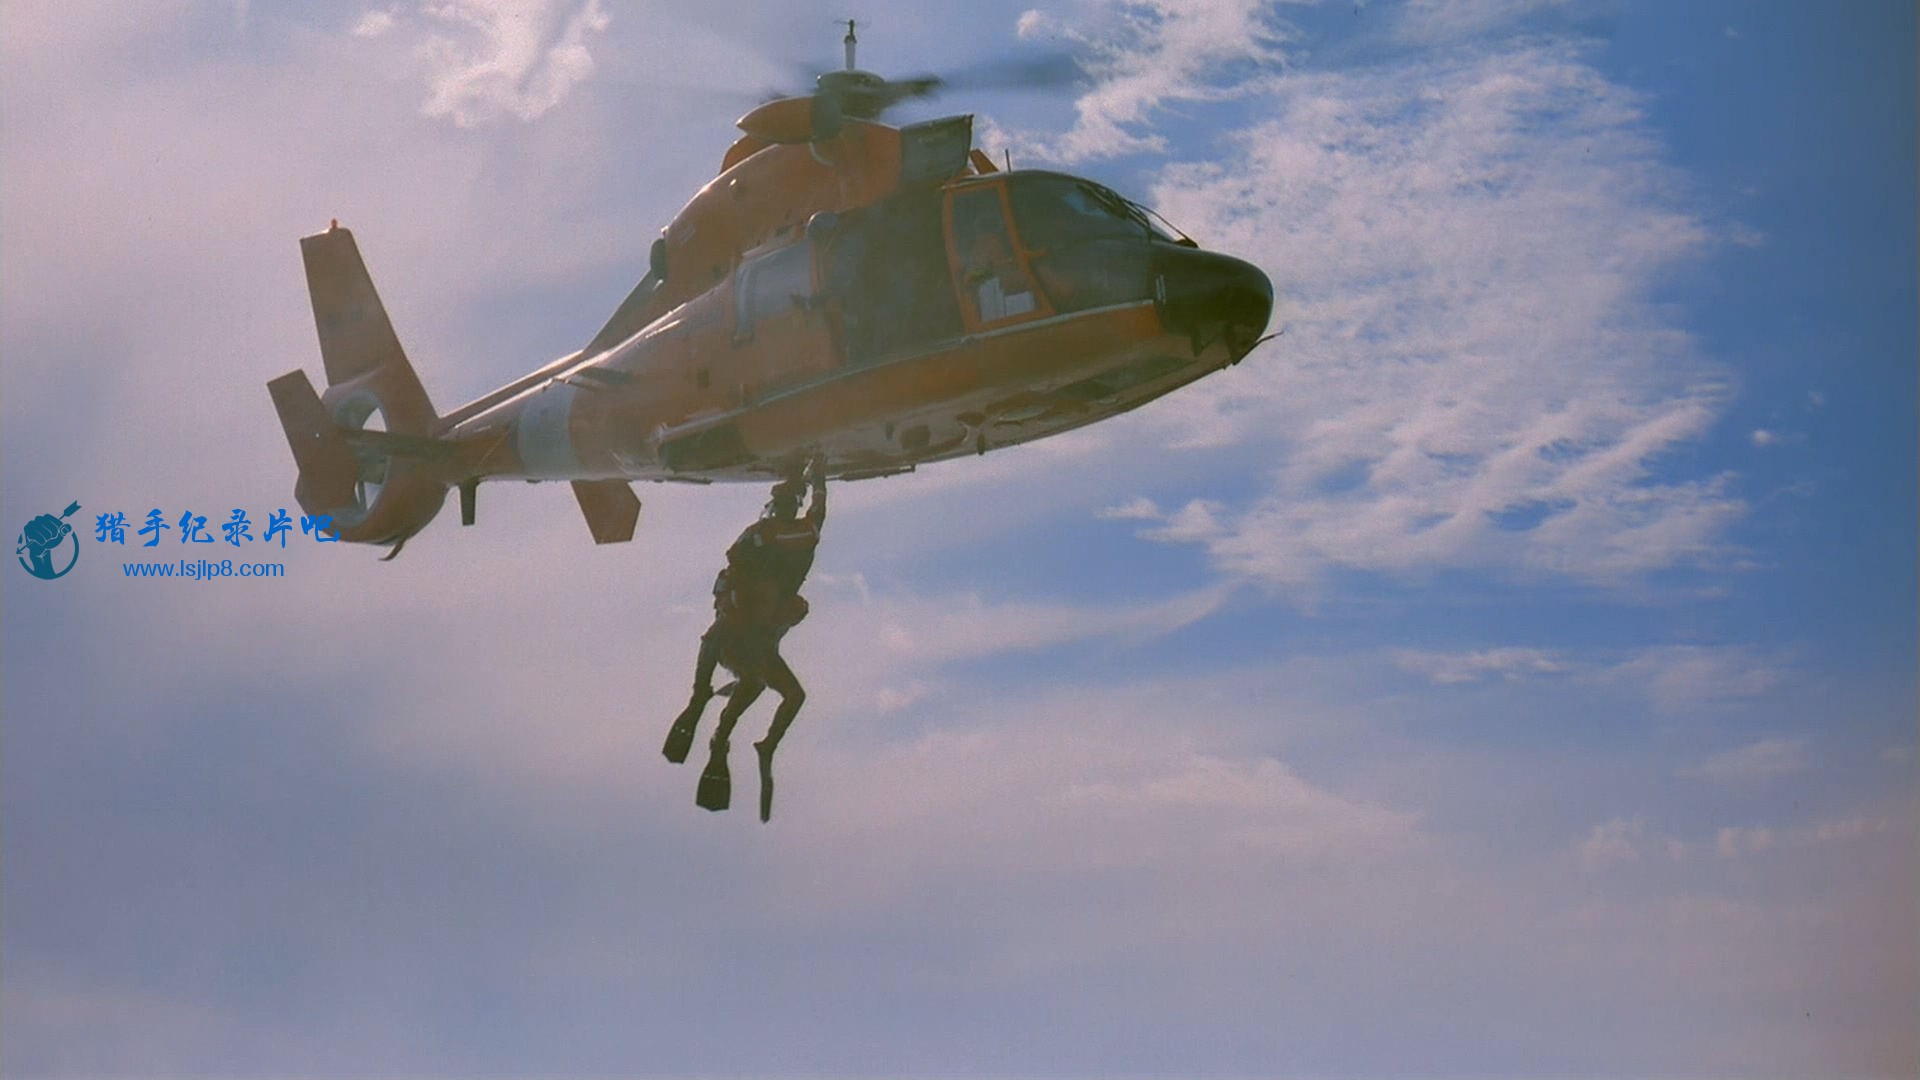 IMAX.Straight.Up.Helicopters.in.Action.2002.1080p.BluRay.x264-DON.mkv_20200803_1.jpg